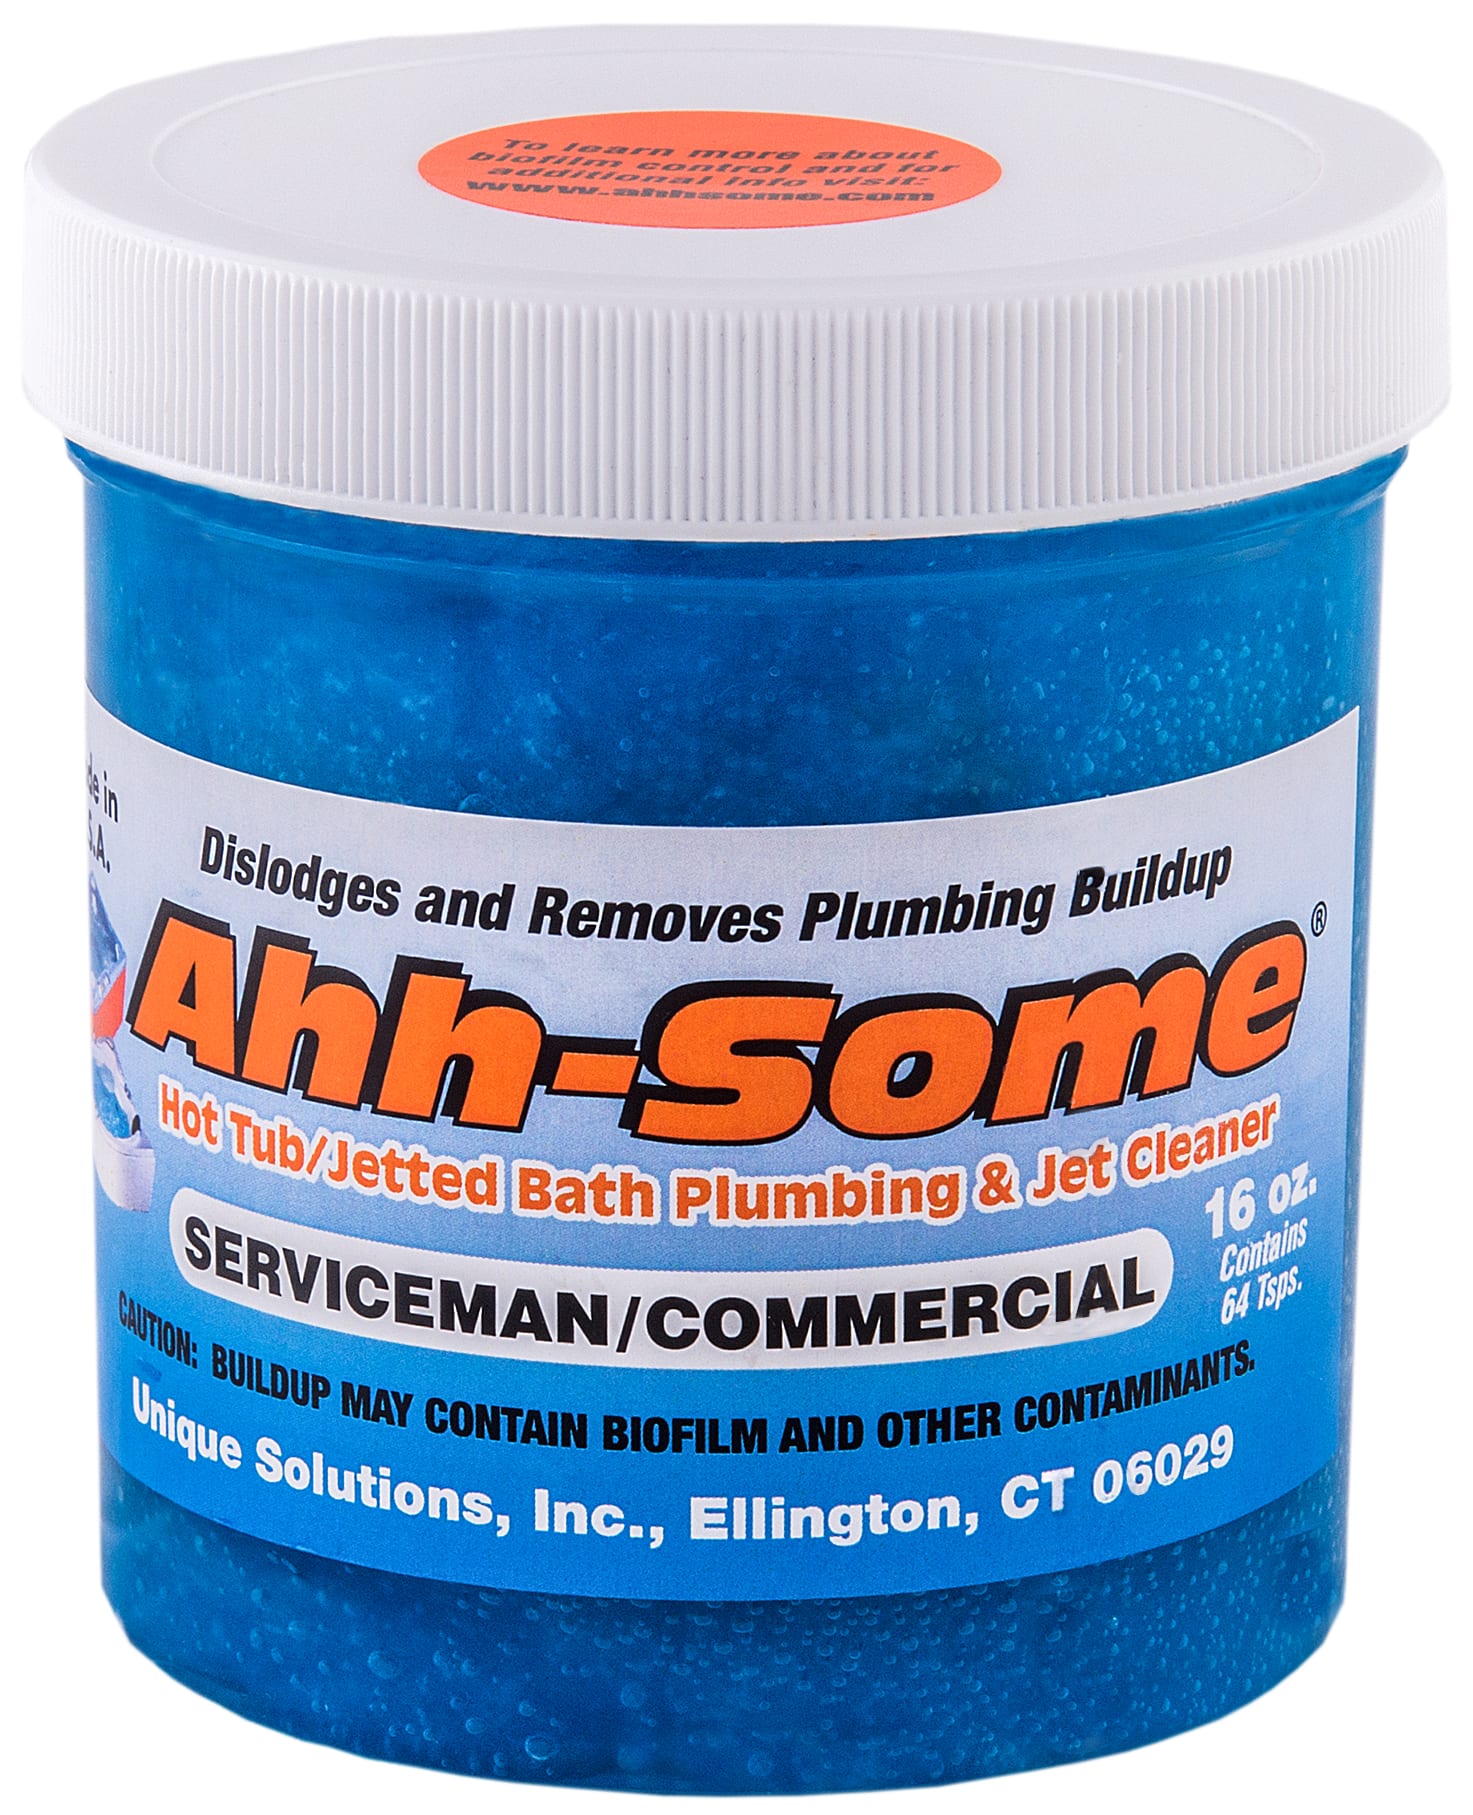 Ahh-some 16oz hot tub/jetted bath plumbing & jet cleaner